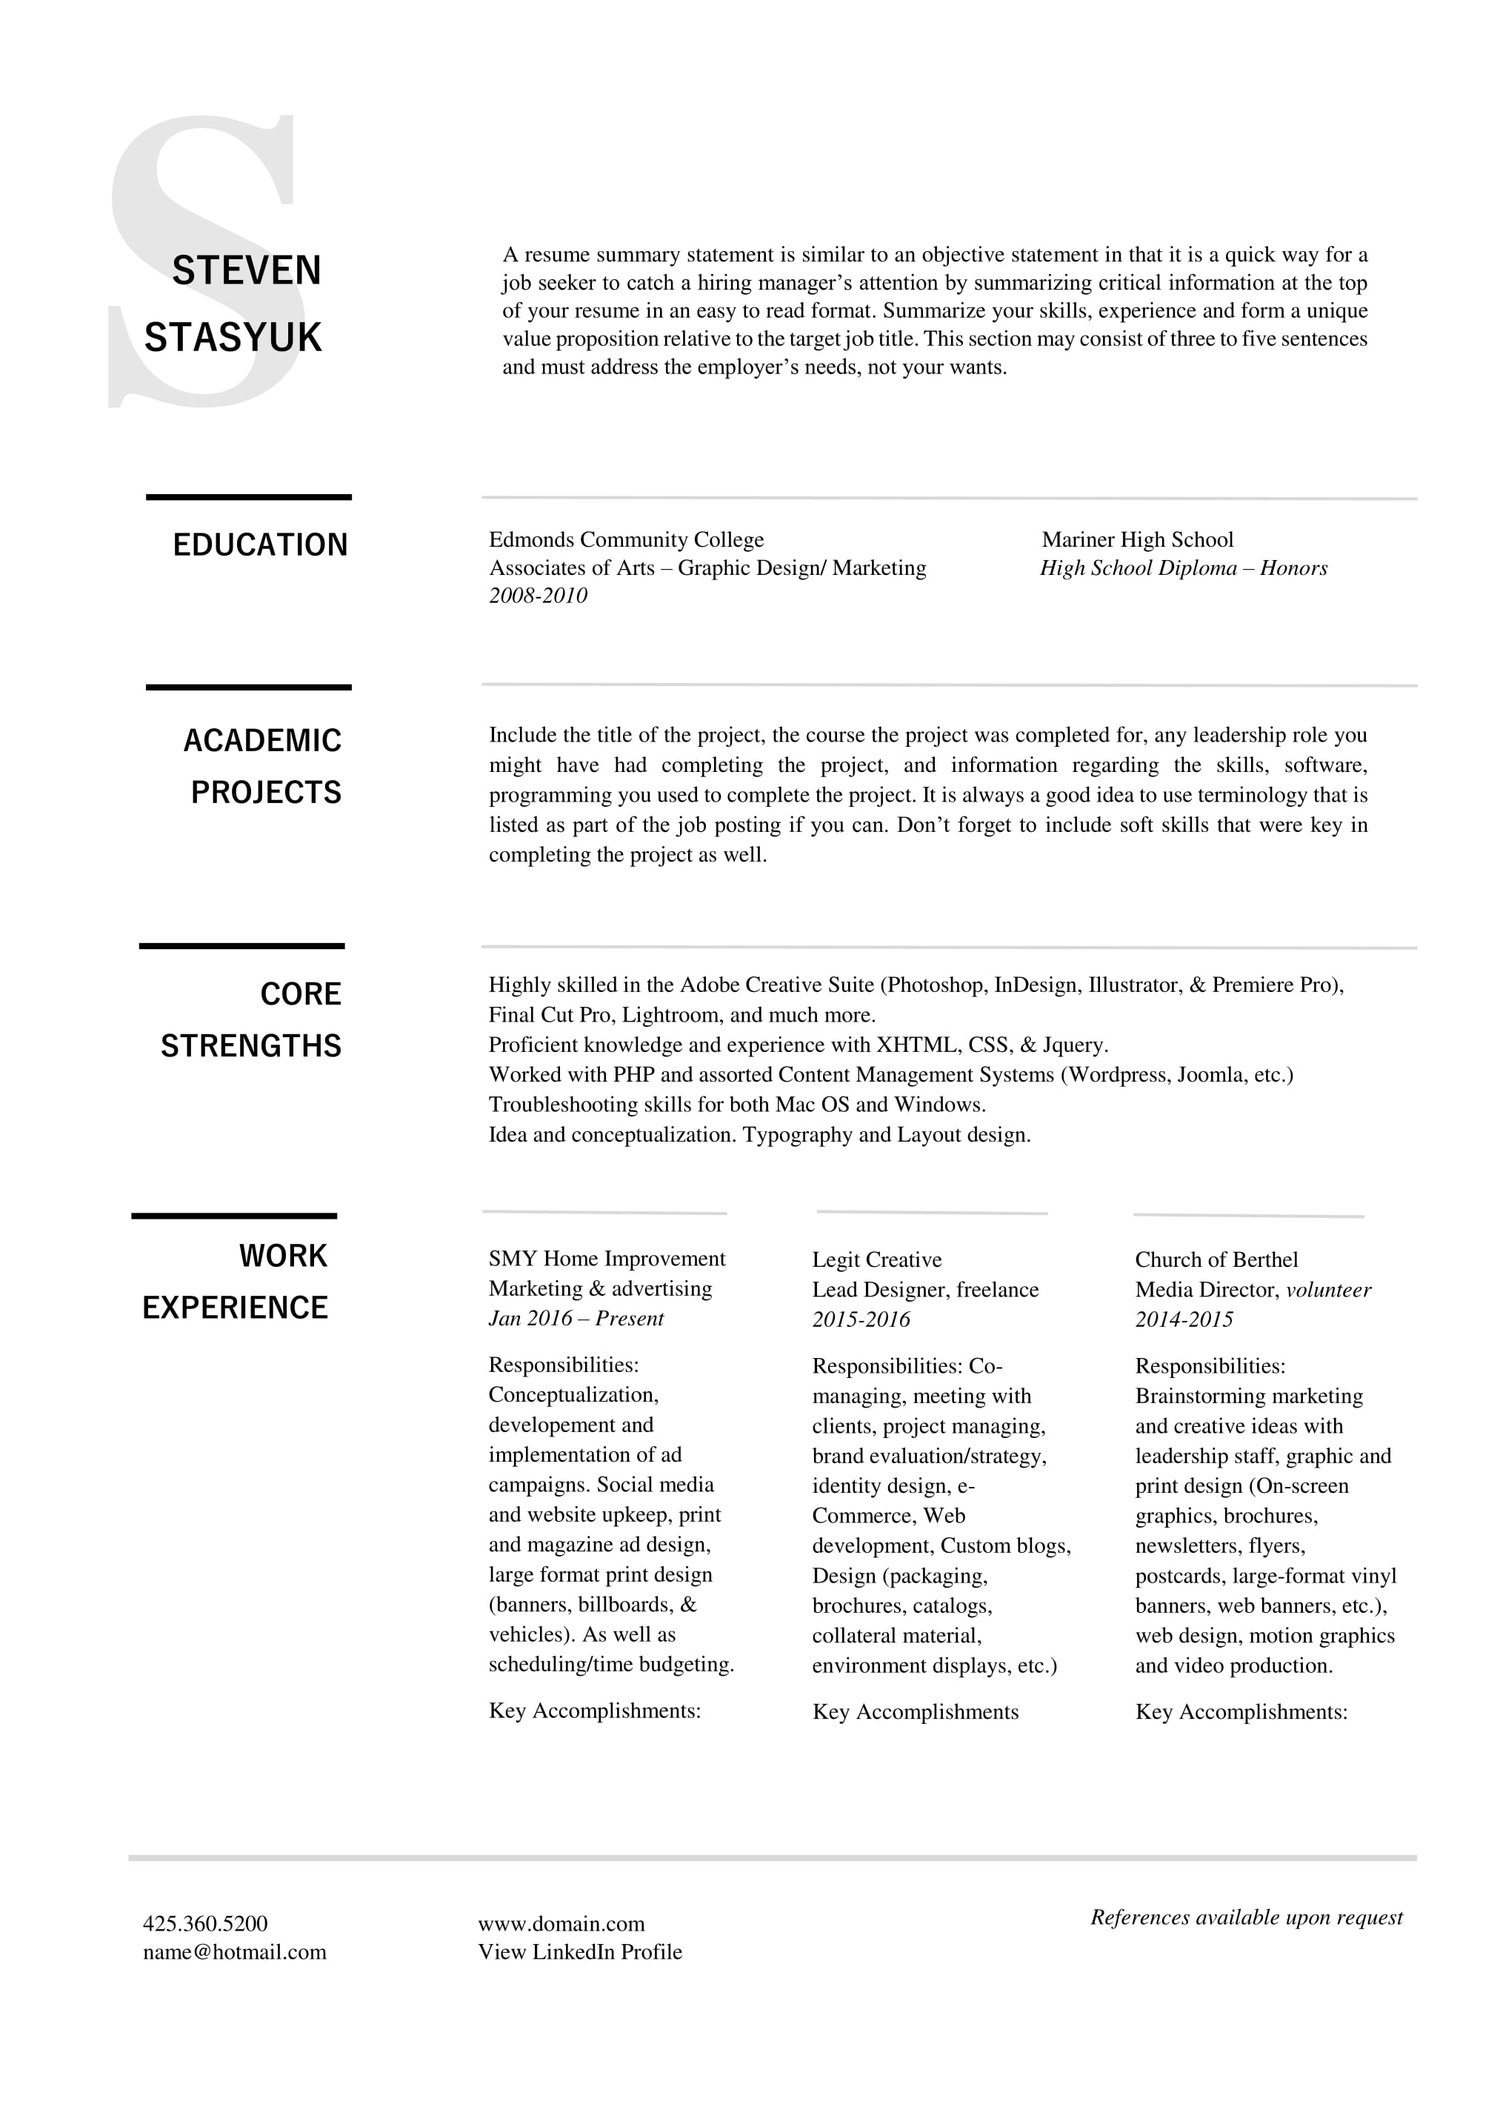 Cover Letter Soft Skills from static1.squarespace.com